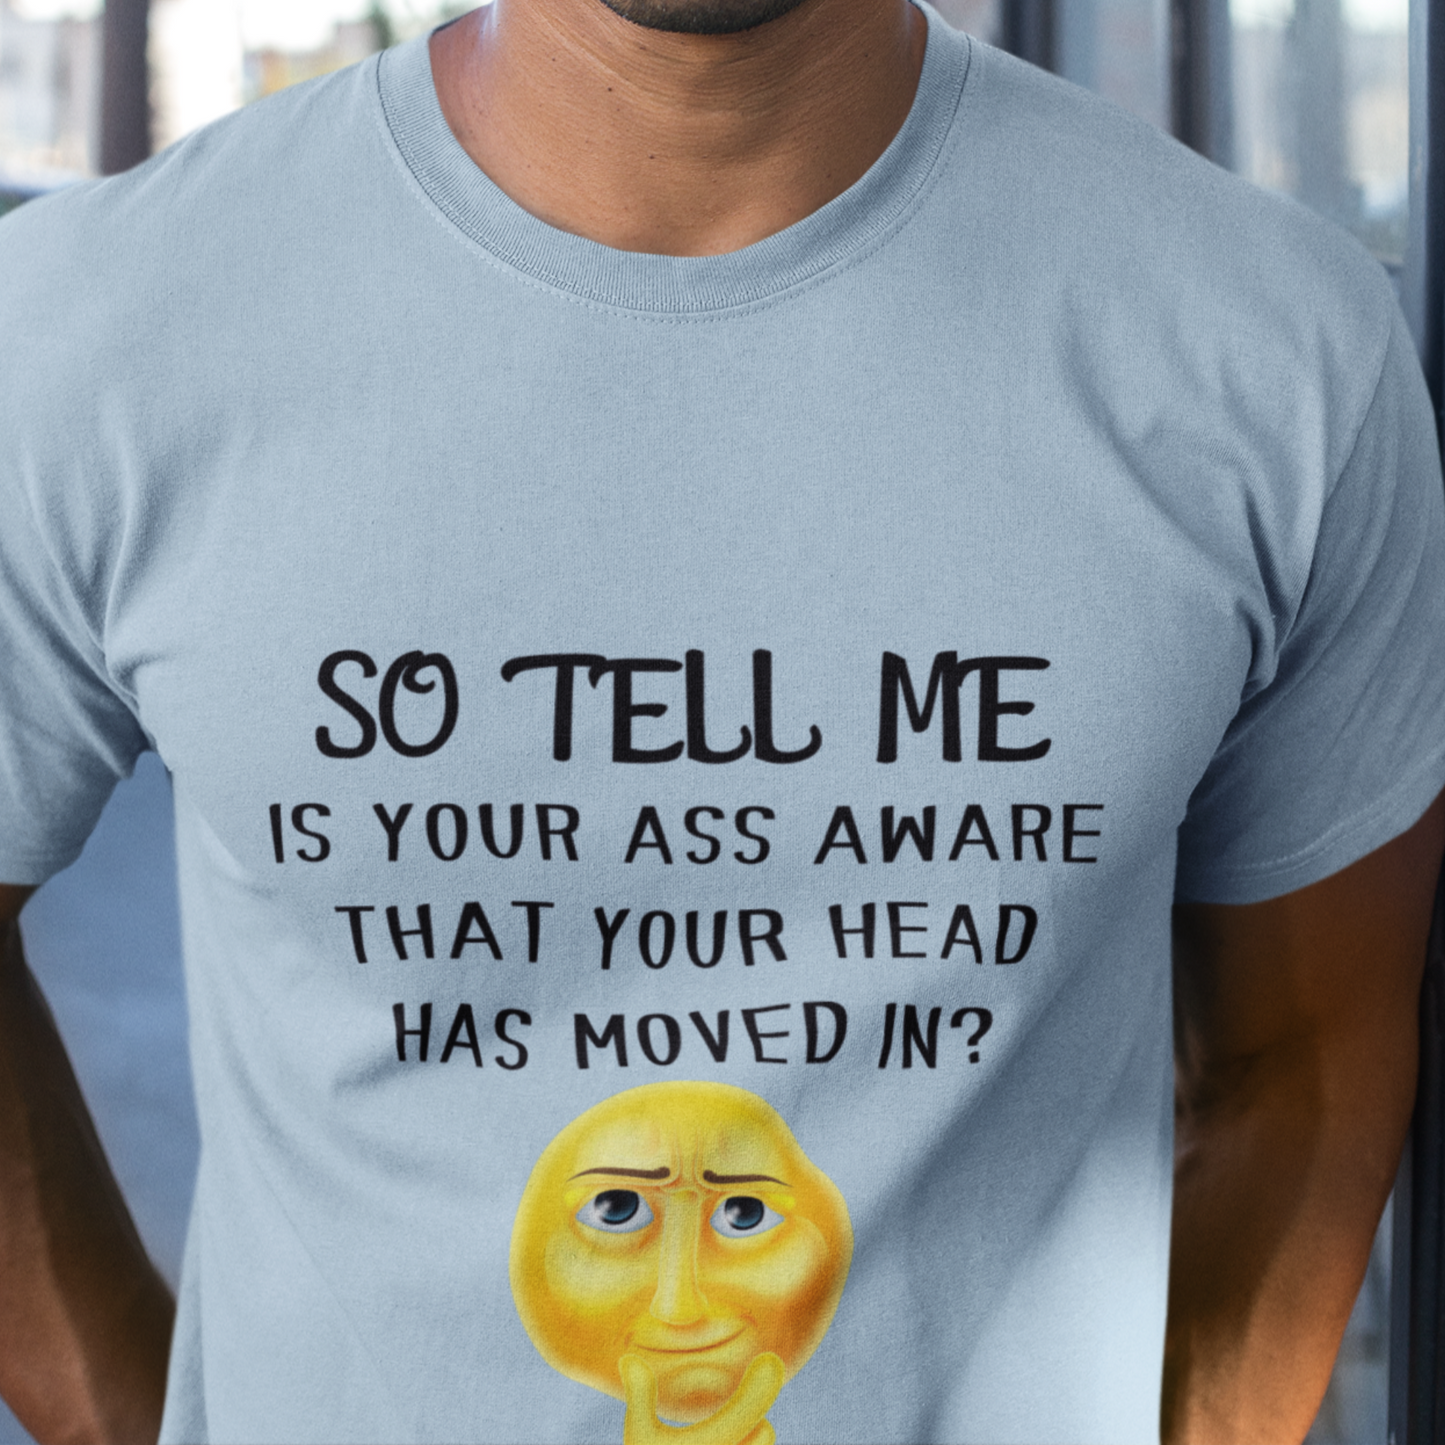 So Tell Me Is Your Ass Aware...Unisex Funny Sarcastic Shirt, Funny Shirt for Men, Fathers Day Gift, Husband Gift, Humor T-shirt, Dad Gift,  Men's Shirt